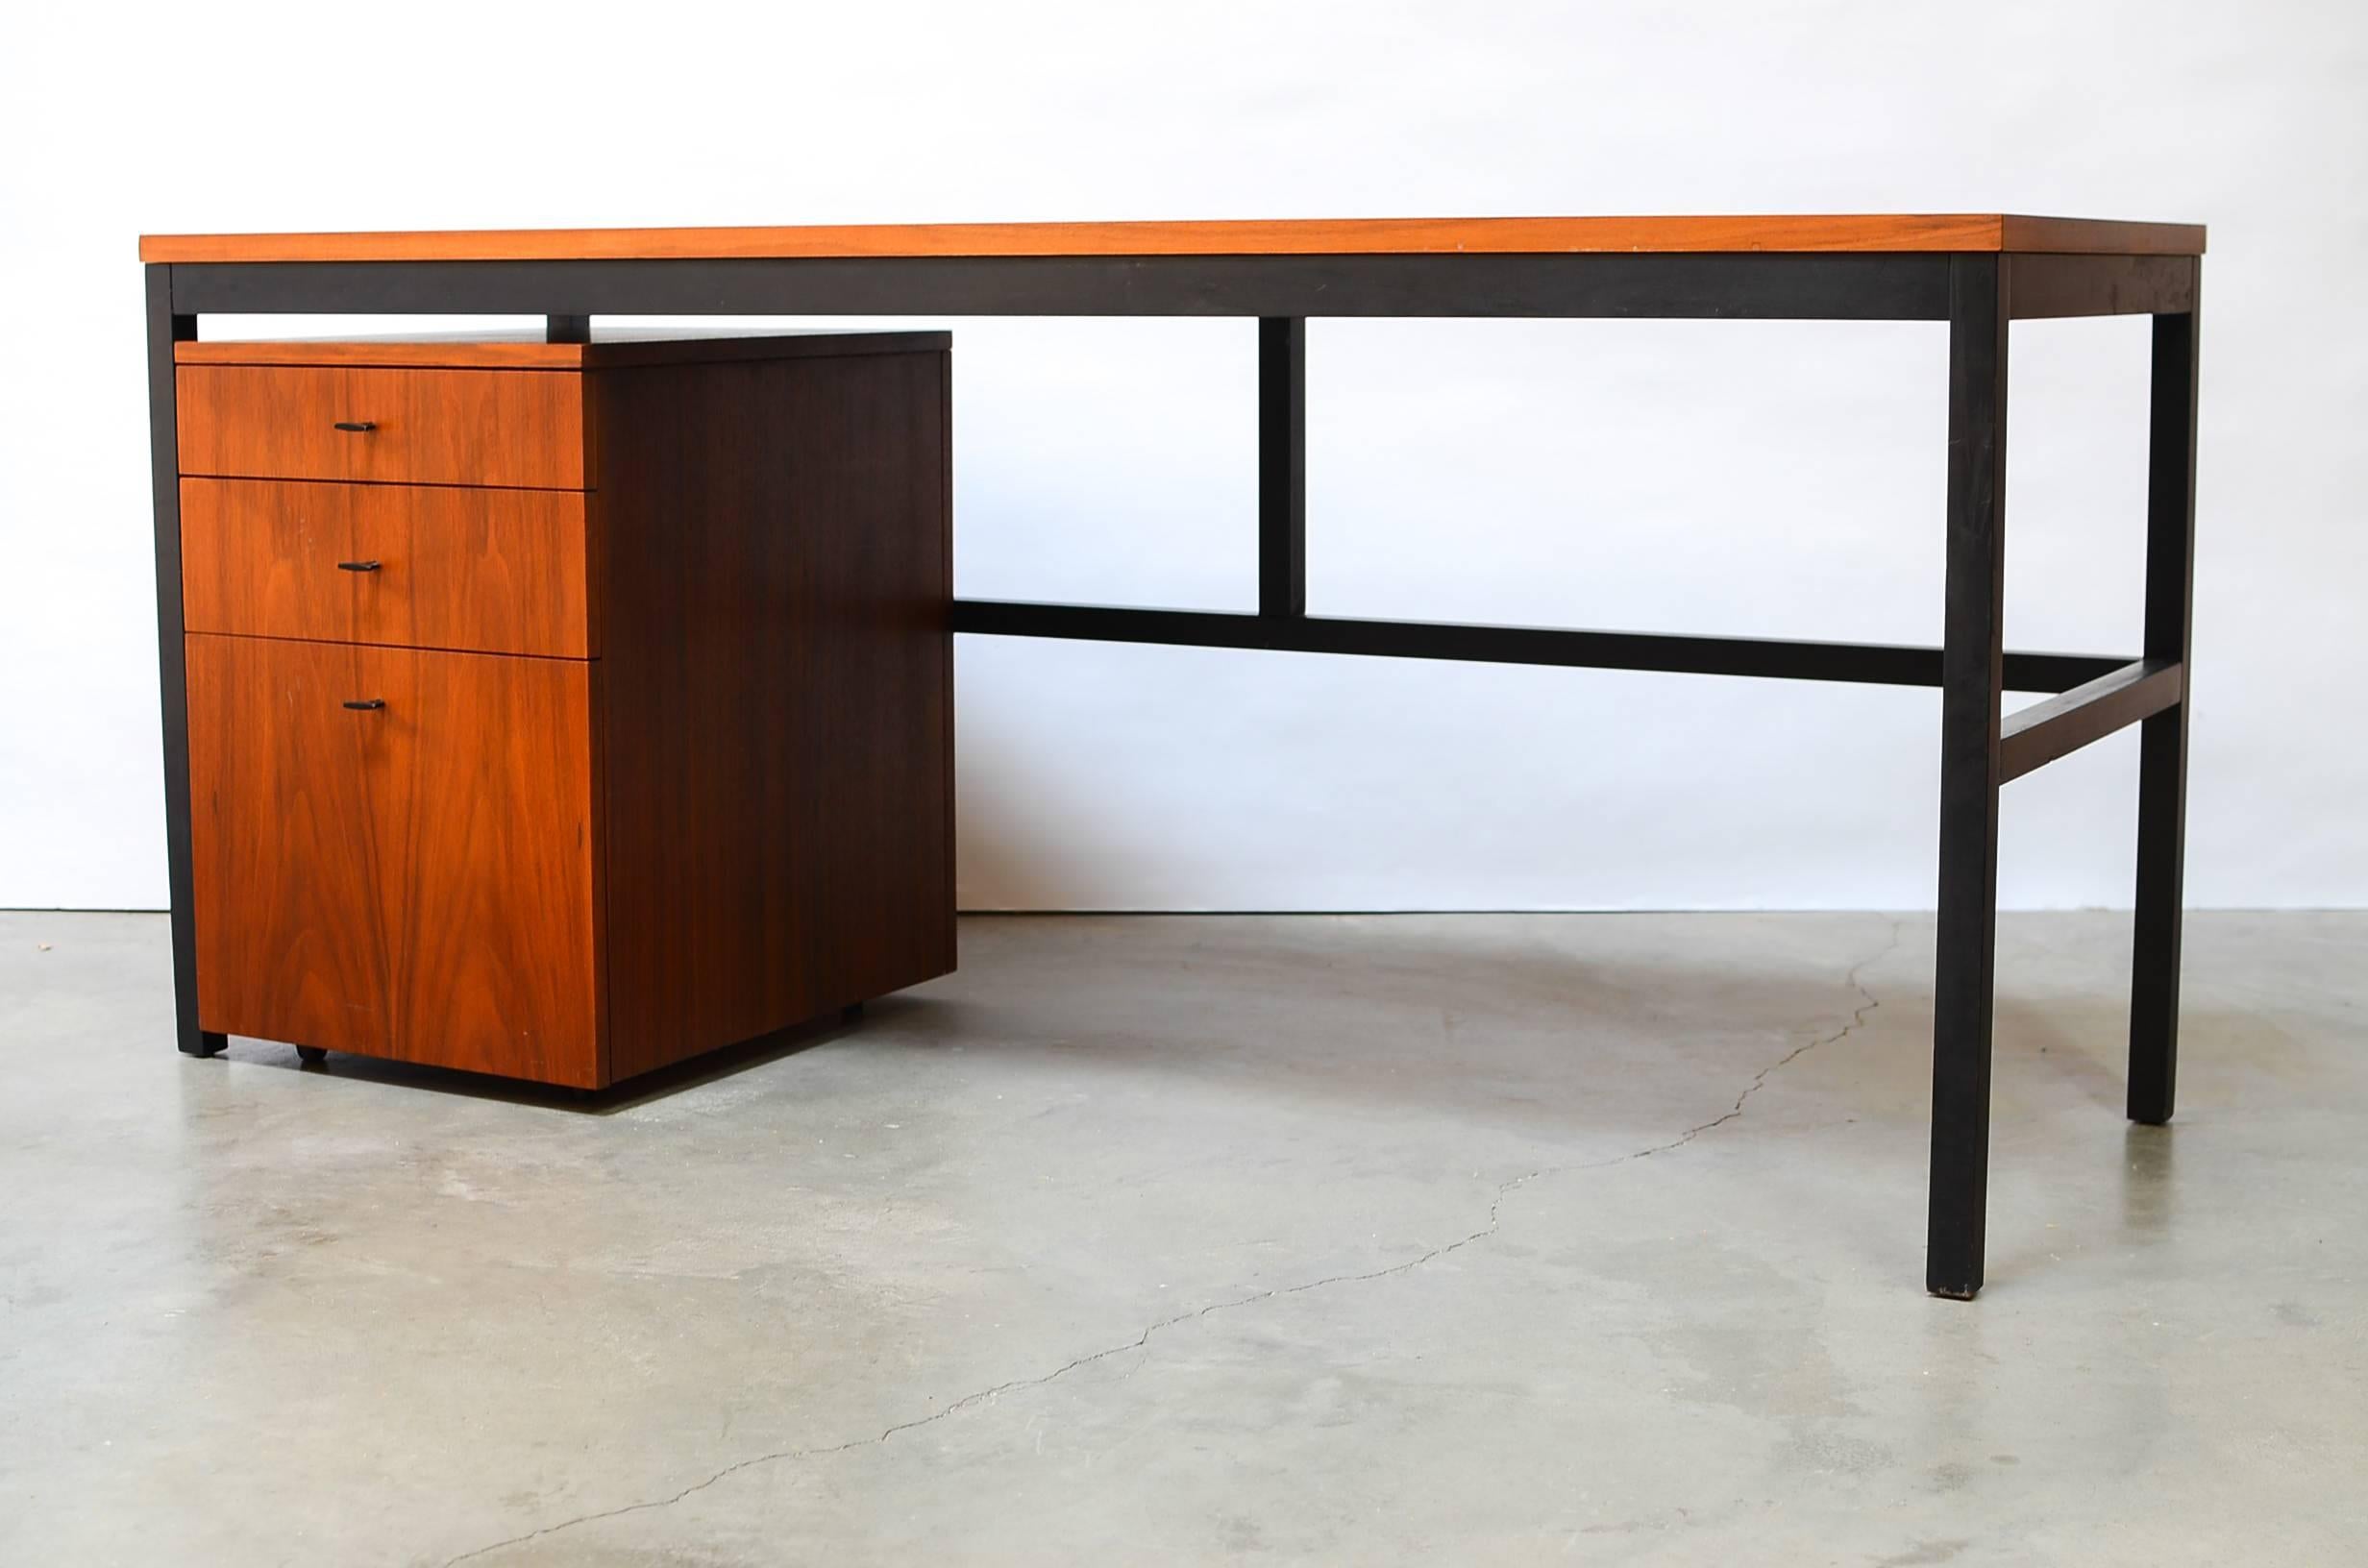 Stunning walnut architectural desk with movable drawers by Milo Baughman for Directional. Beautiful walnut grain with a very sturdy surface. Excellent details on this one. Very versatile piece.